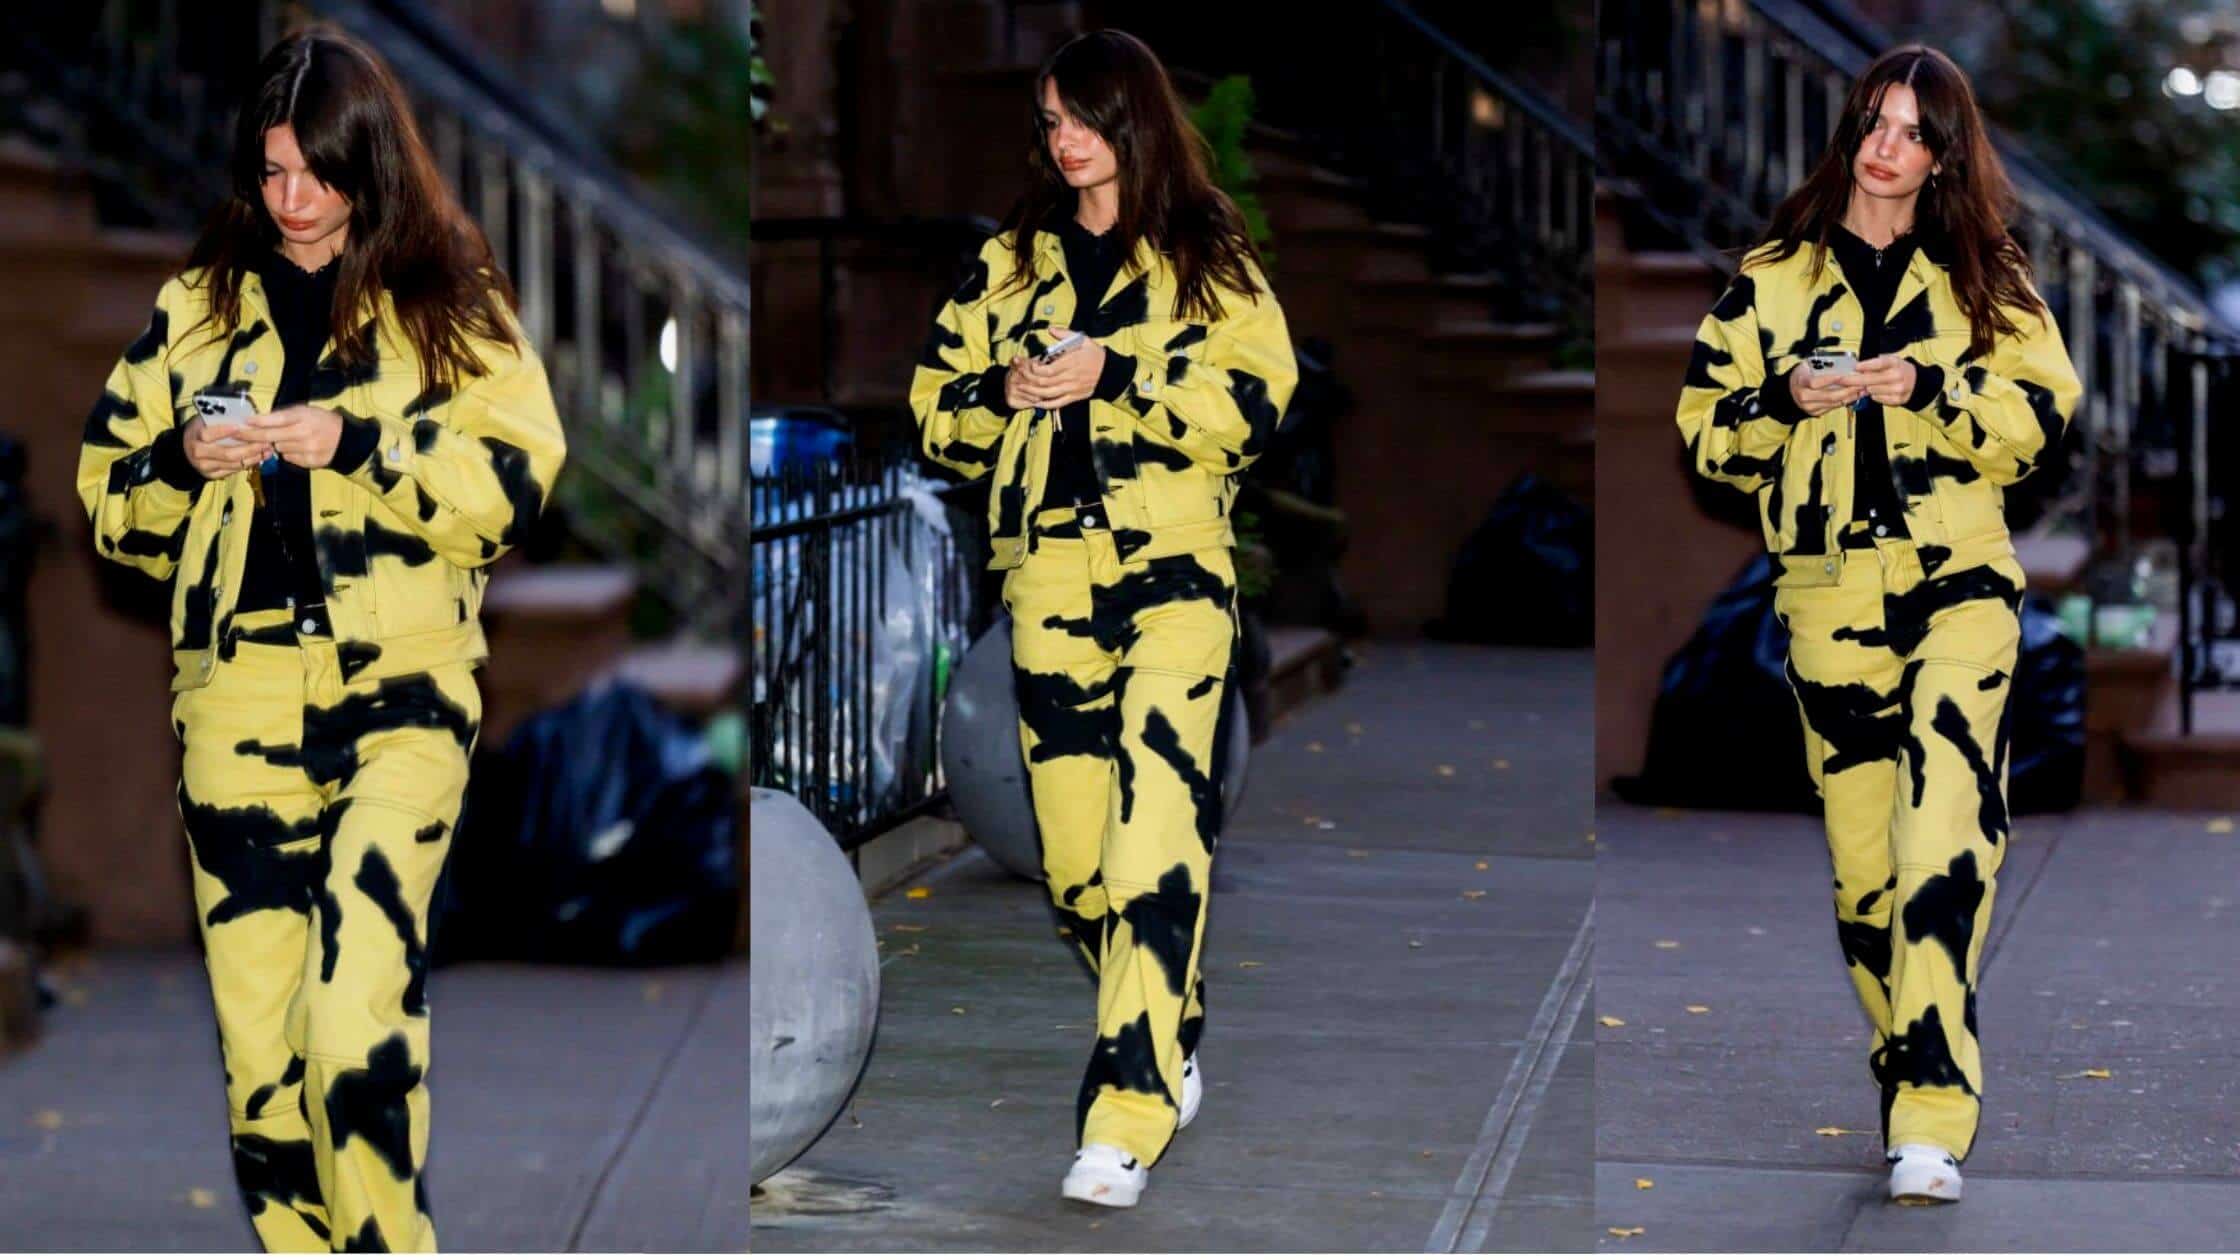 Emily Ratajkowski Spotted Wearing A Matching Tie-Dye Set For Her Latest NYC Stroll